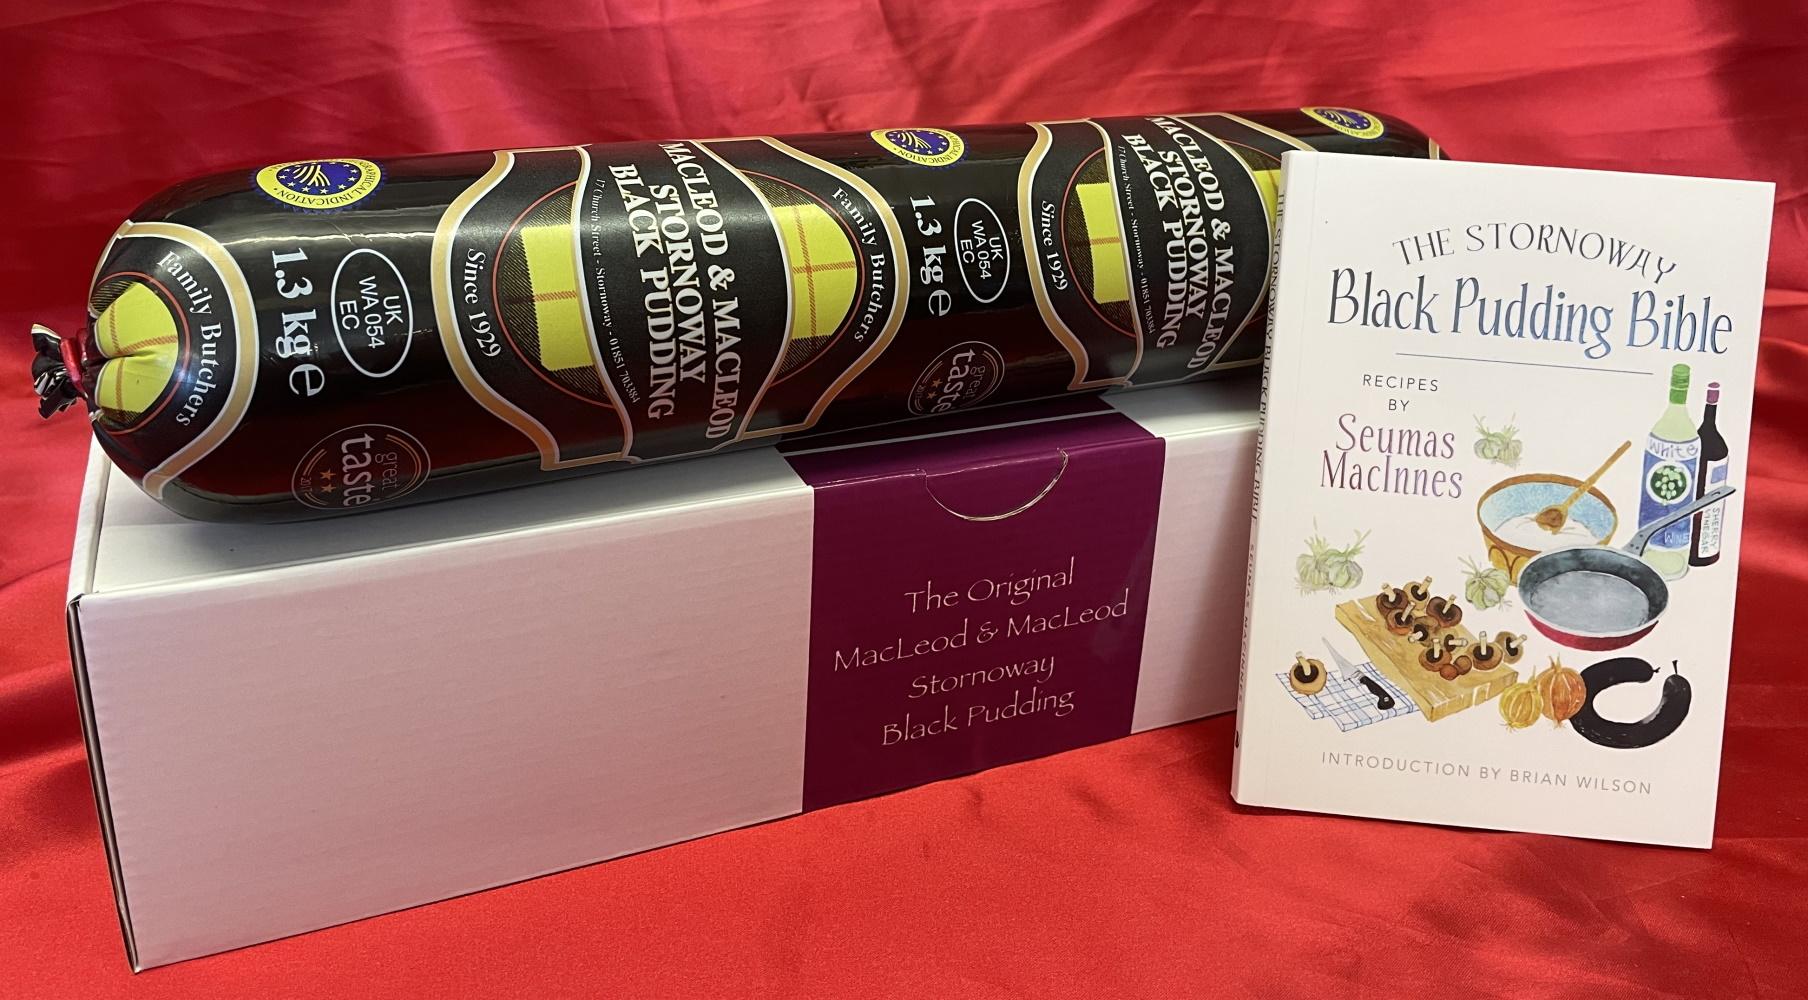 Stornoway Black Pudding in a Gift Box with The Stornoway Black Pudding Bible